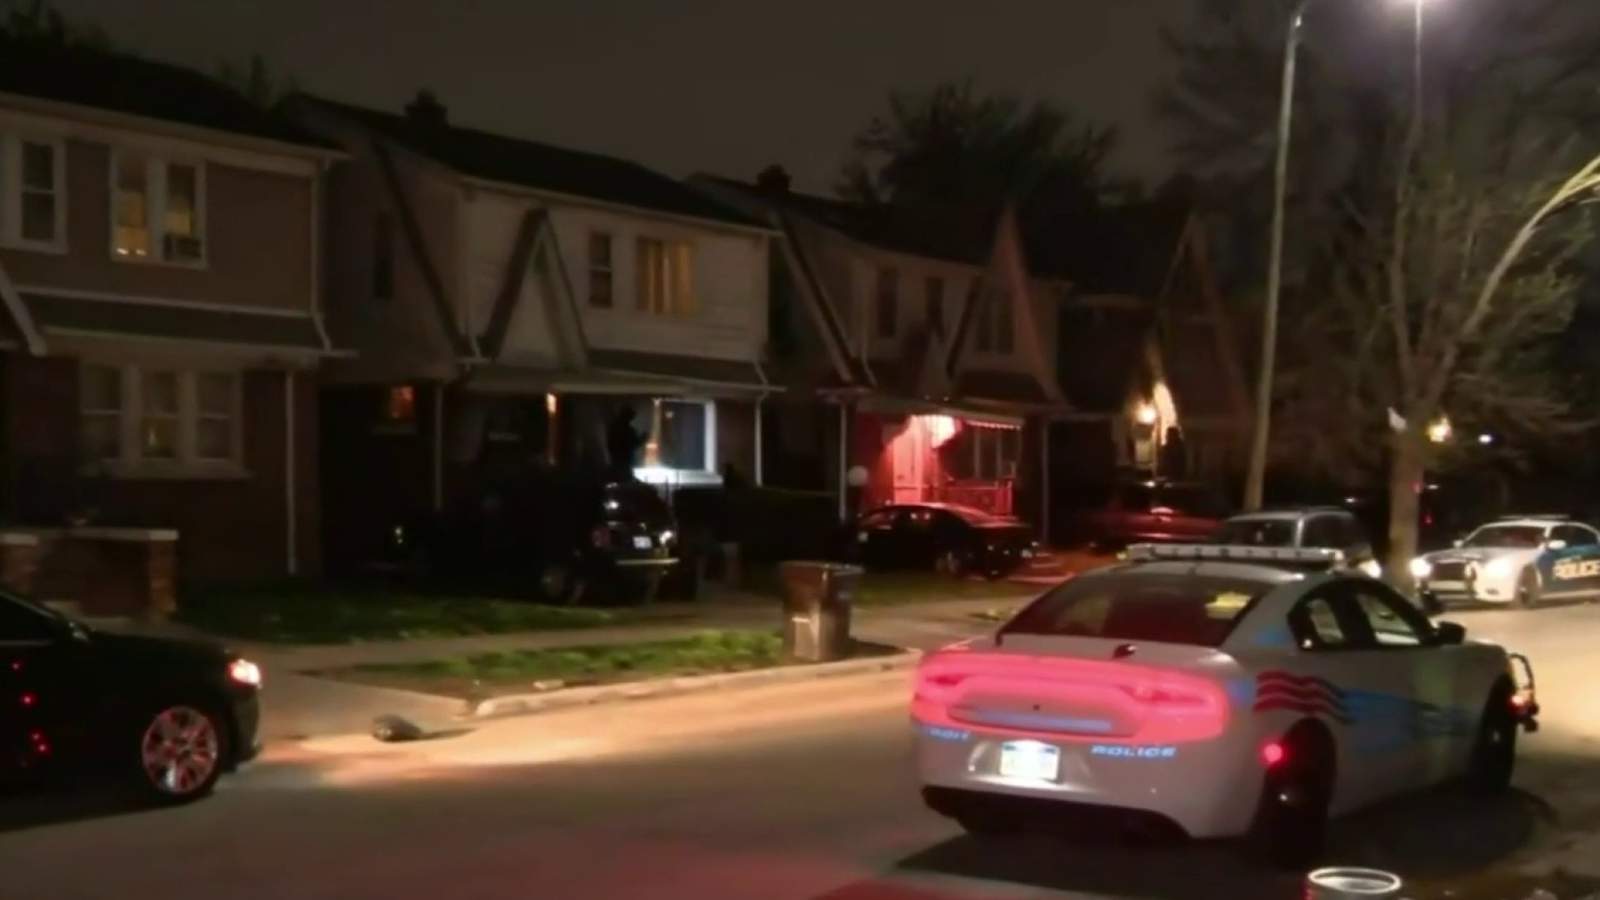 7-year-old girl shot in domestic violence incident on Detroit’s west side